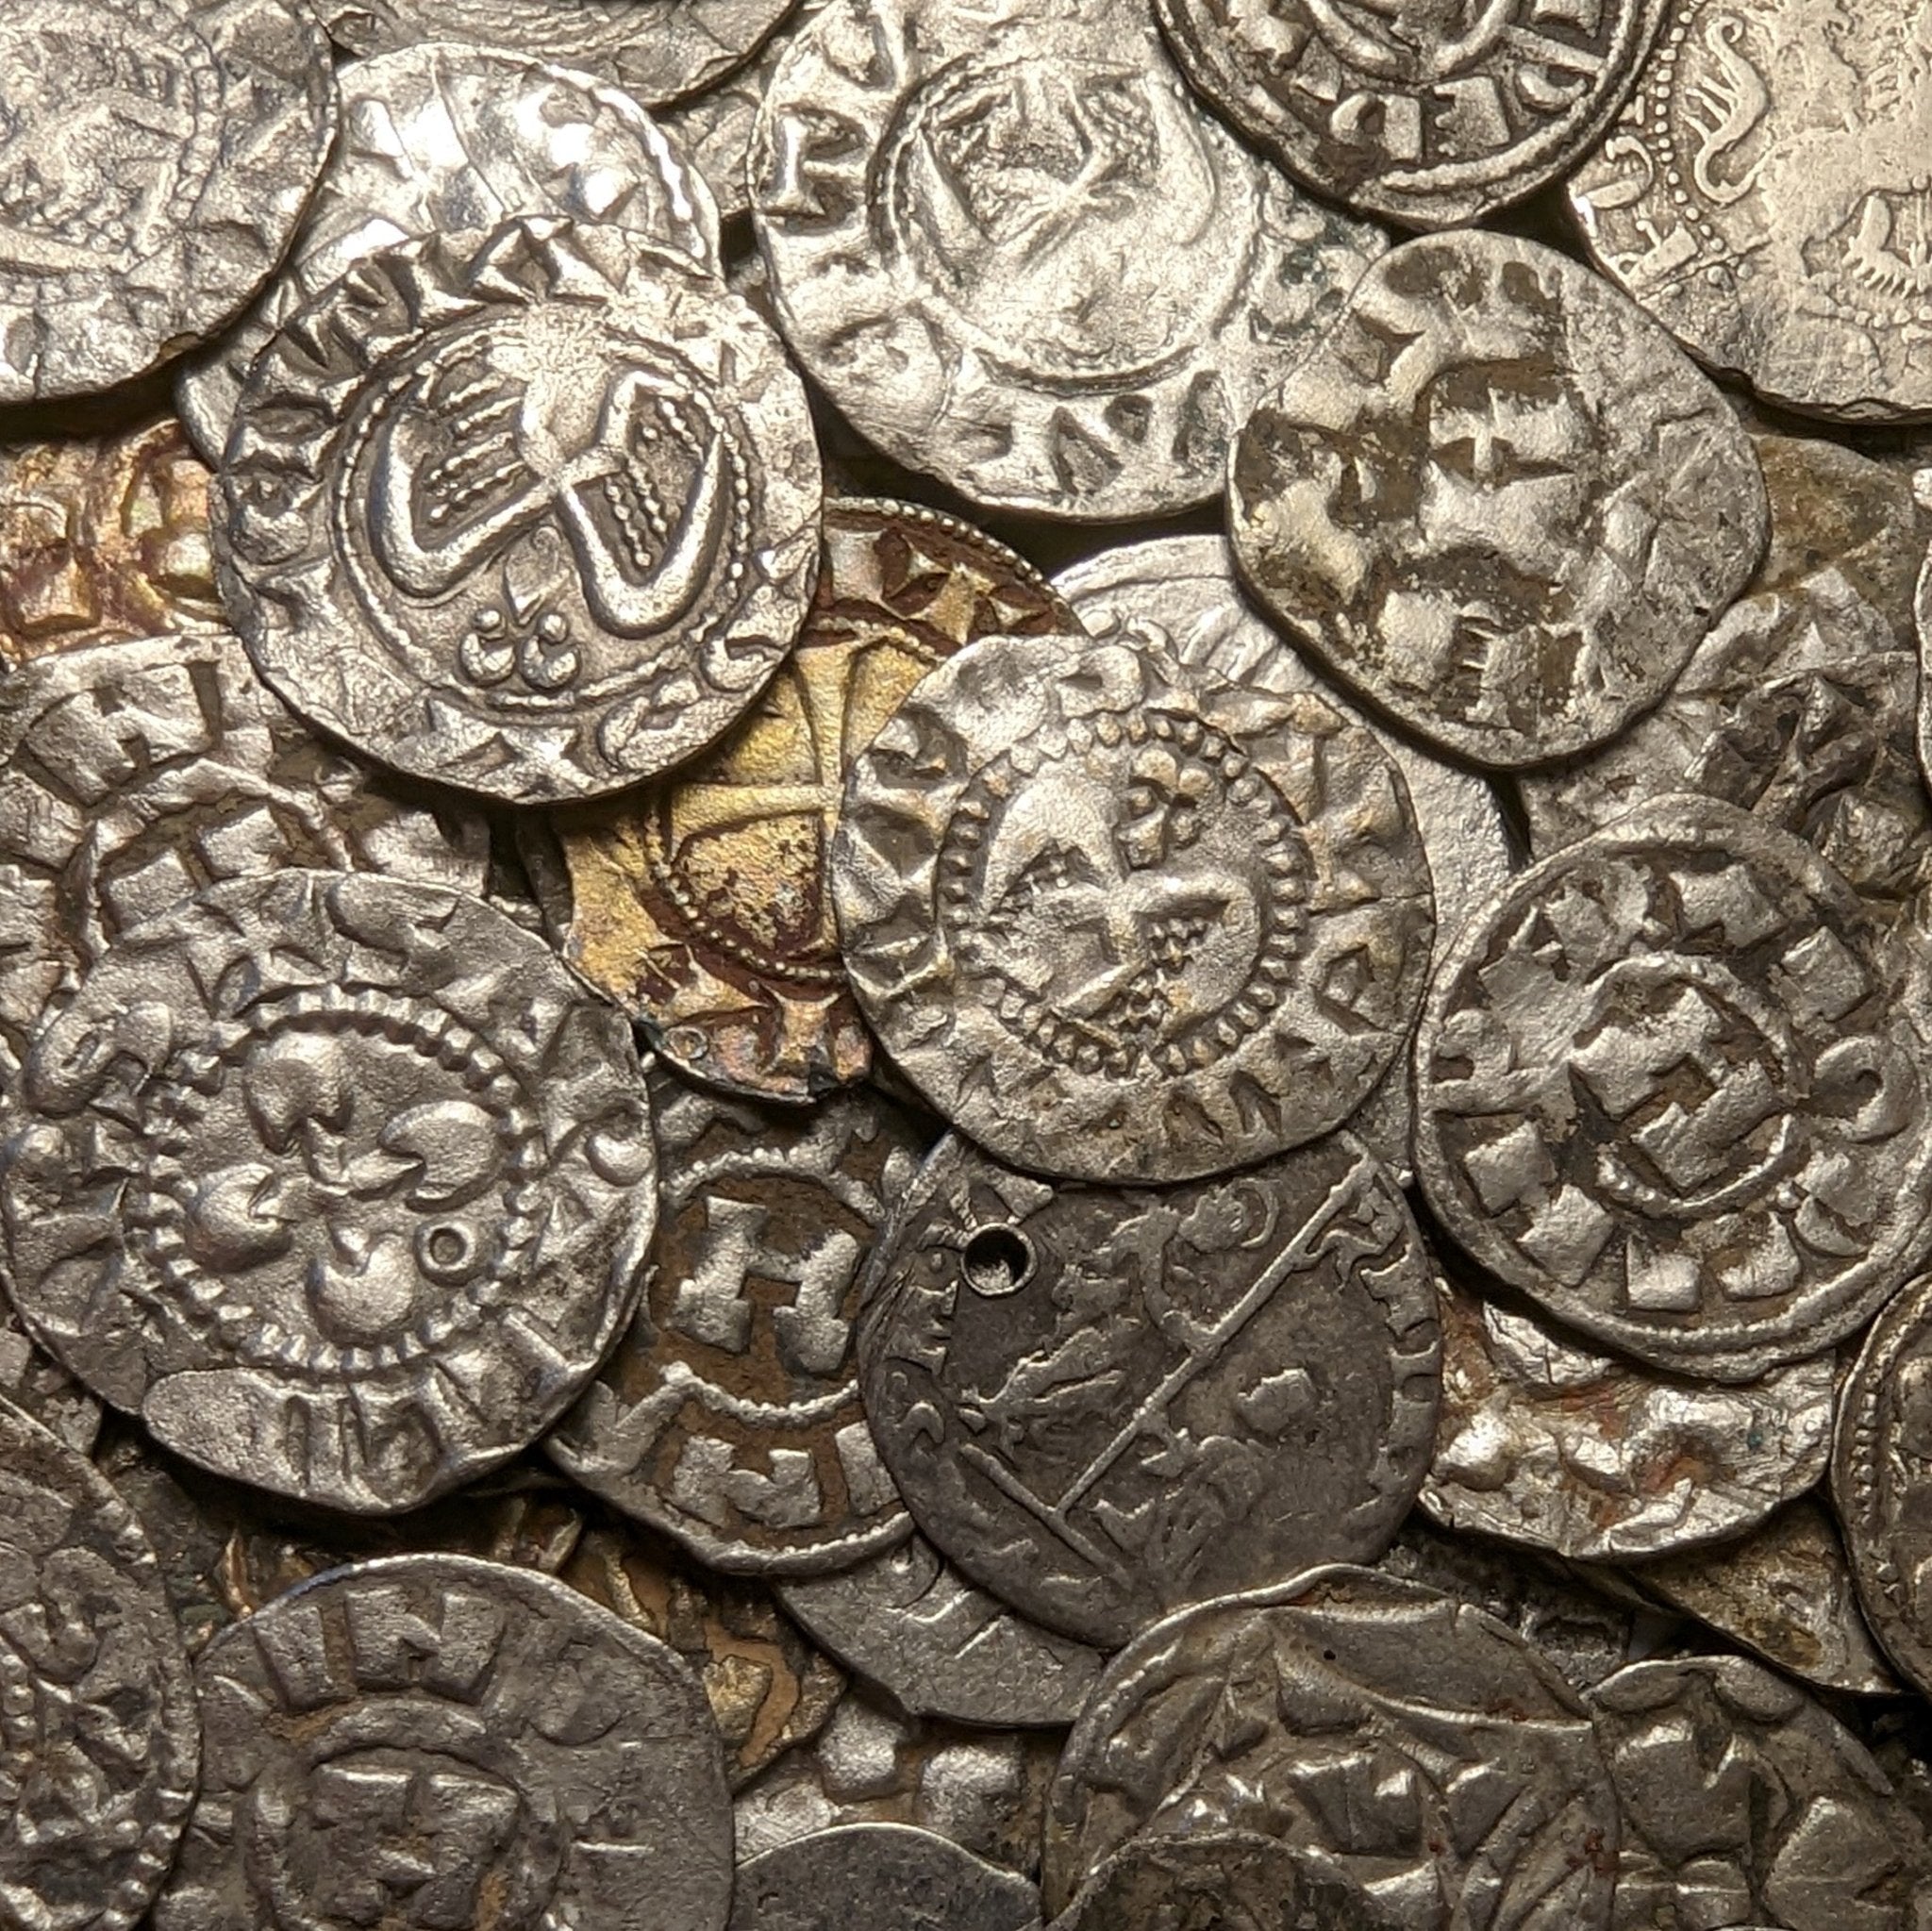  Lots Of Old Coins